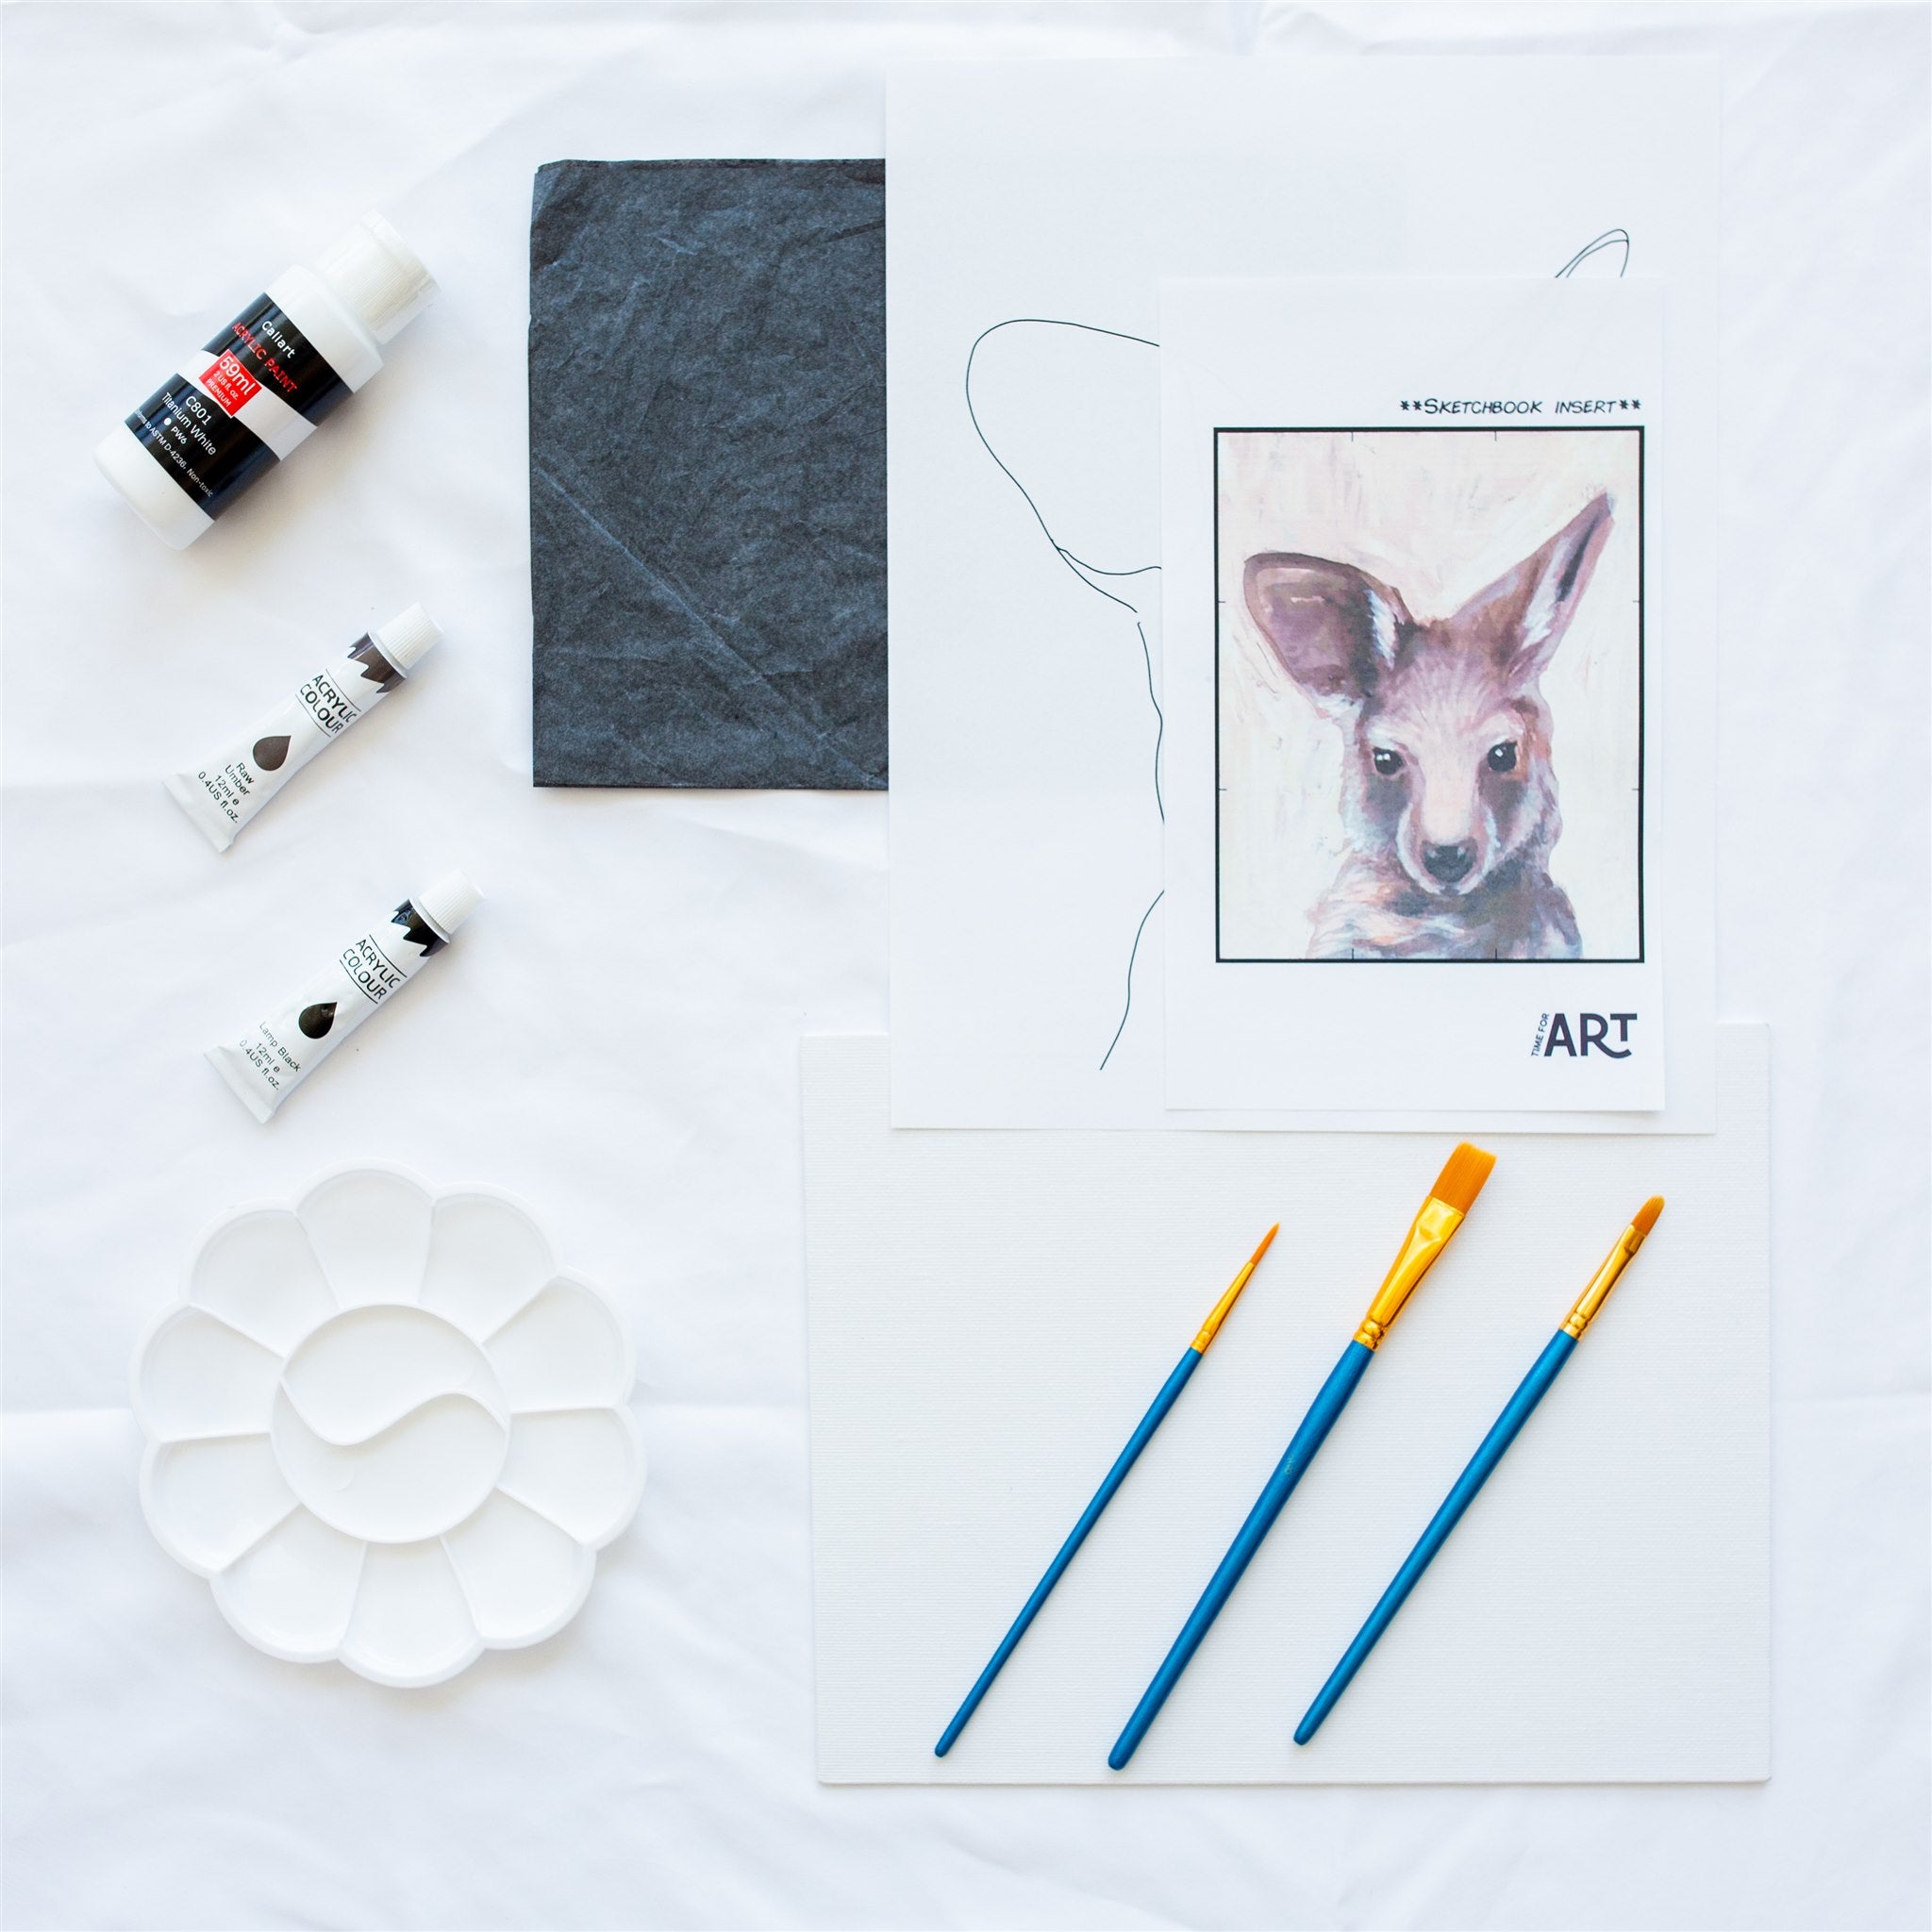 Whats included in the baby kangaroo painting kit. 4 acrylic paints, painters pallet, brushes, canvas panel, traceable outline, and reference image.